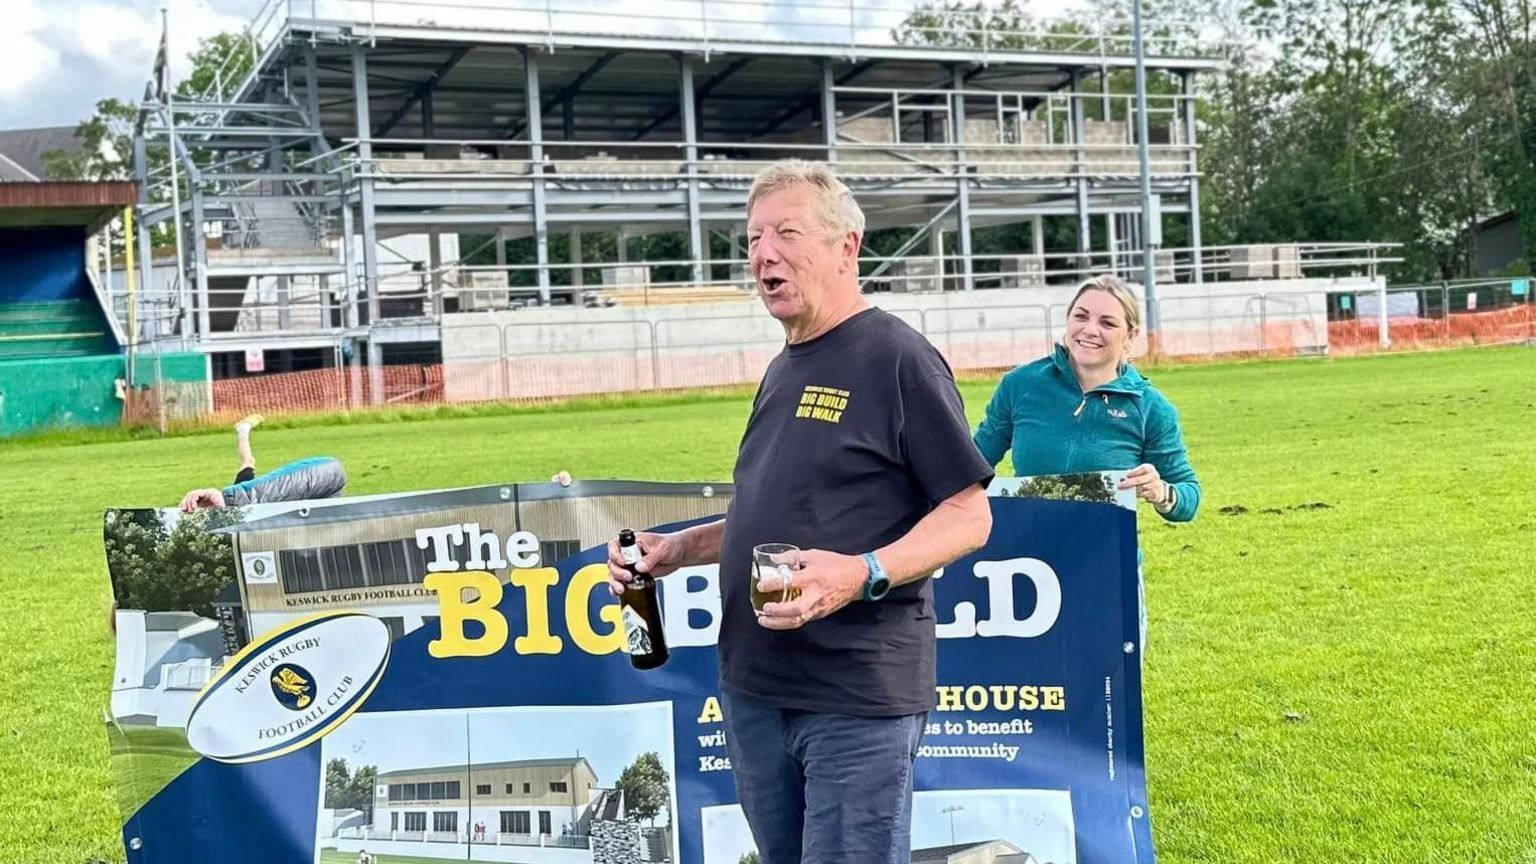 Alan Dunn raising a glass on the pitch, in front of the metal frame of the new building. He stands in front of a sign saying 'The Big Build'. A girl with blonde hair and a green top can be seem in the background